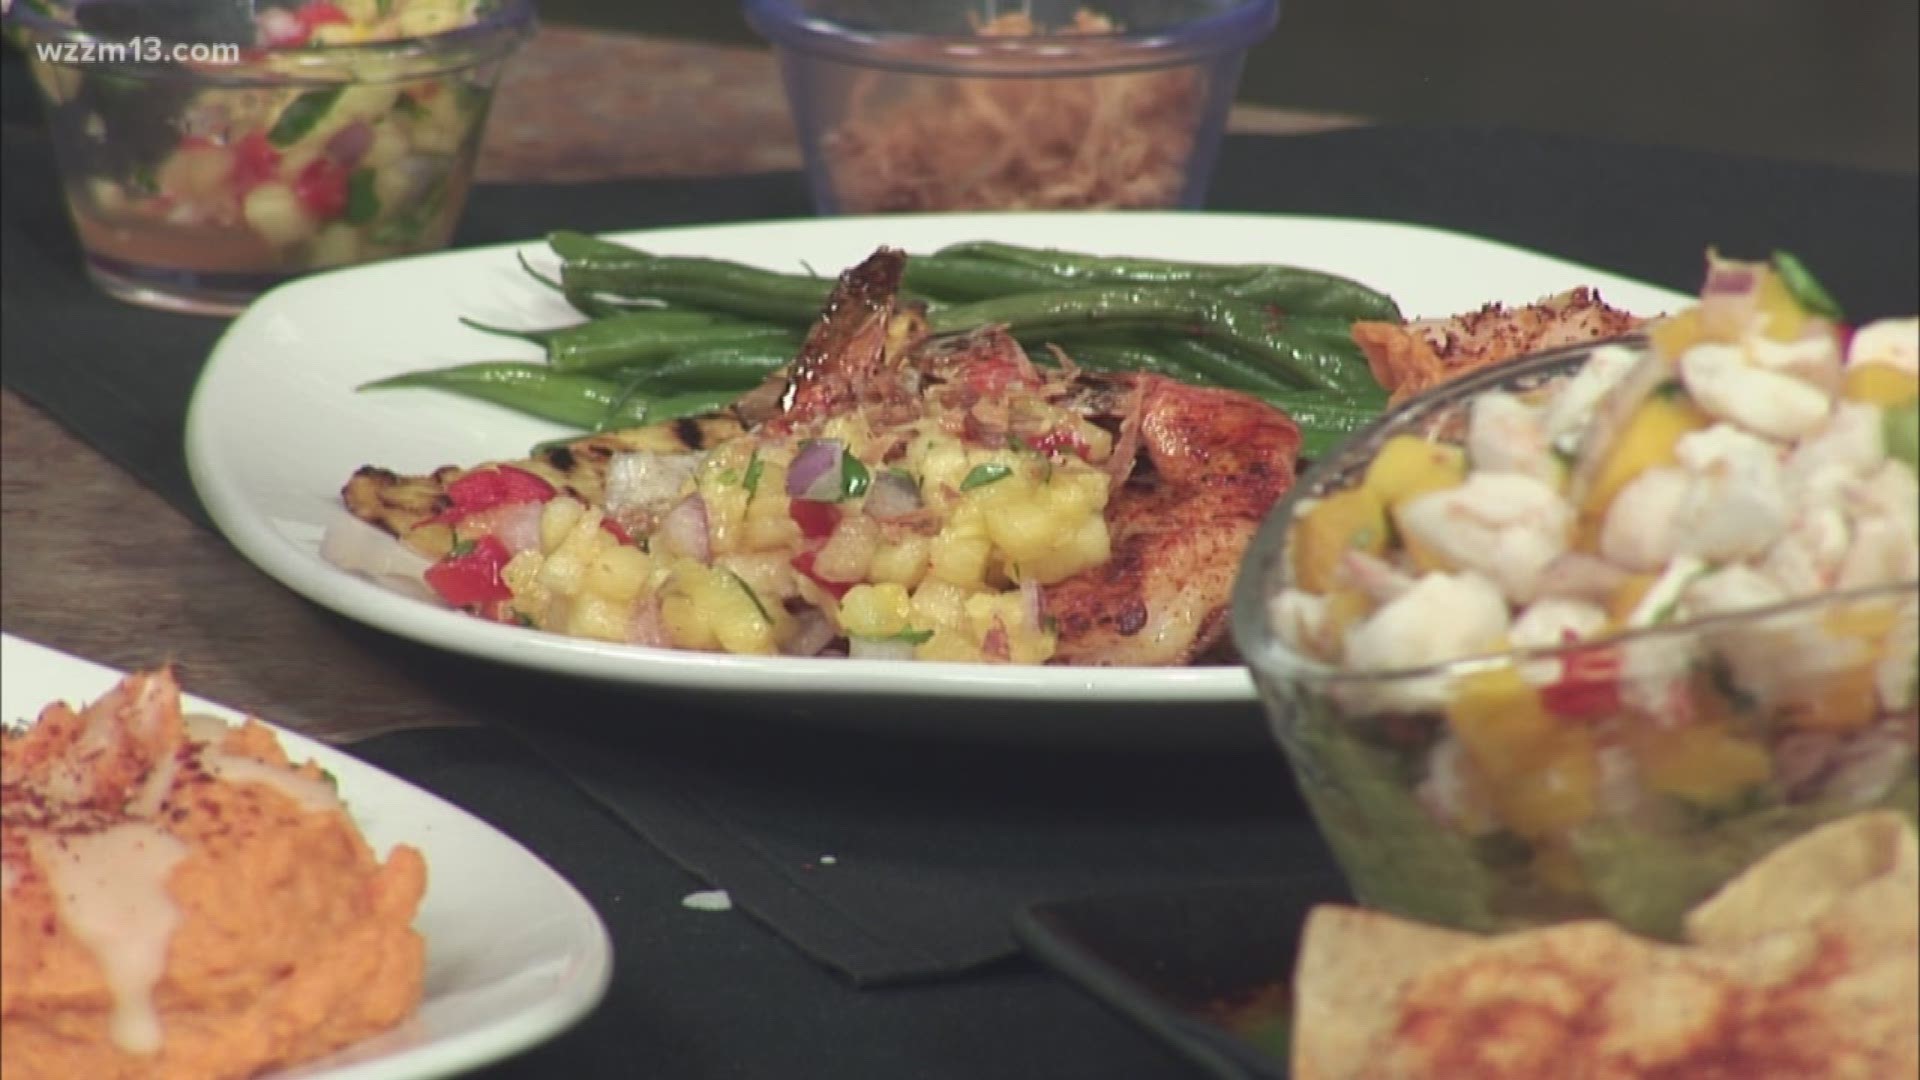 What's Cooking: Bonefish Grill